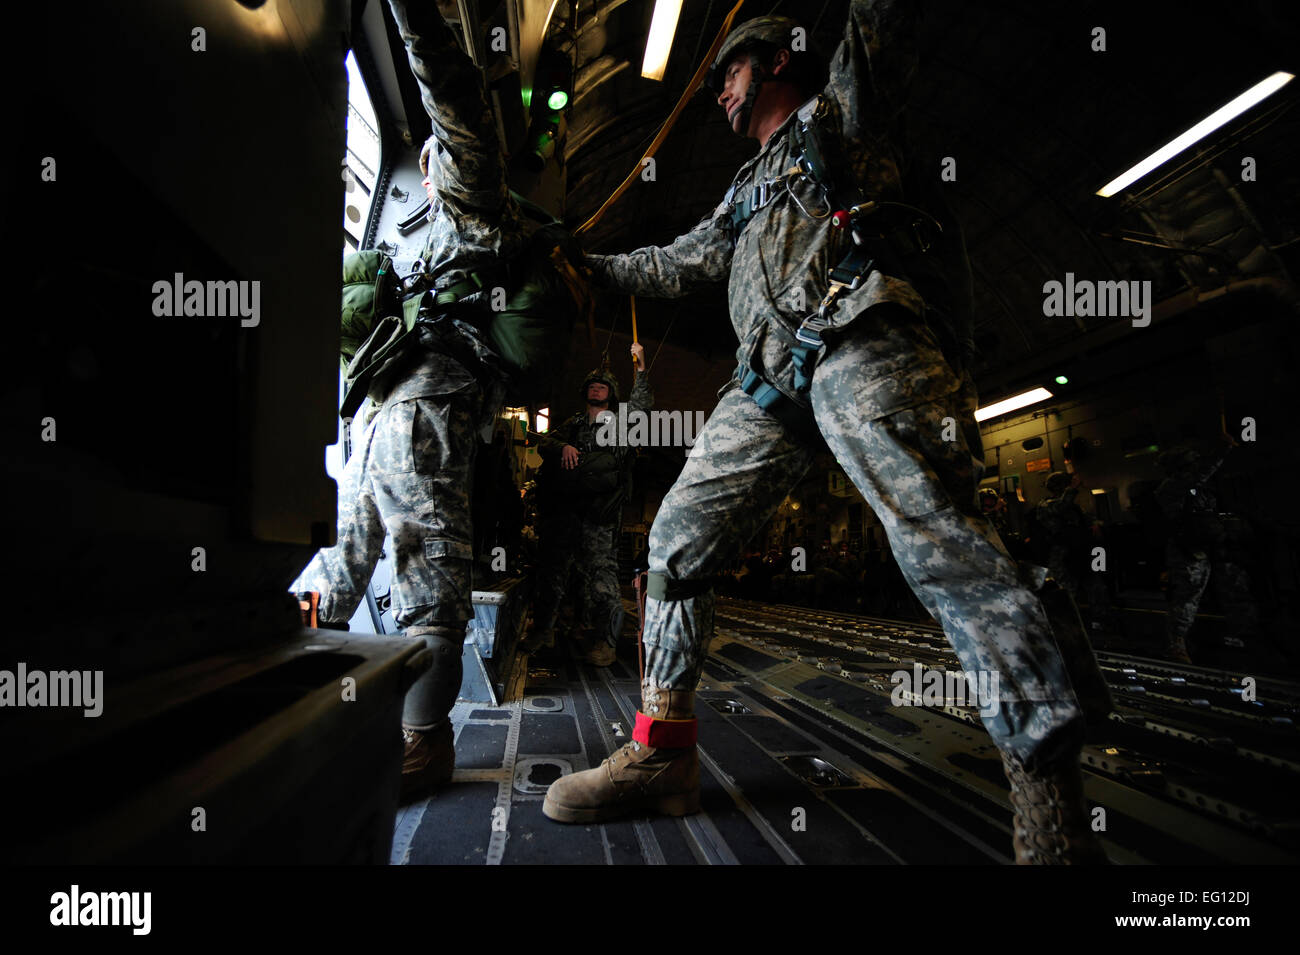 U.S. Soldiers Sgt. Joshua Harpleft and Staff Sgt. Travis Patterson from the 2-319th Airborne Field Artillery, 82nd Airborne Division, Ft. Bragg, N.C., check paratroop doors during strategic brigade airdrop exercise over North Auxiliary Airfield near Northern, S.C., Dec. 16, 2009, demonstrating the global projection of U.S. airpower. Airborne Soldiers from the 2-319th Airborne Field Artillery, 82nd Airborne Division, Ft. Bragg, N.C., were airdropped in the exercise along with cargo pallets to simulate the seizure of a remote airfield, providing a joint training opportunity for the Airmen and So Stock Photo